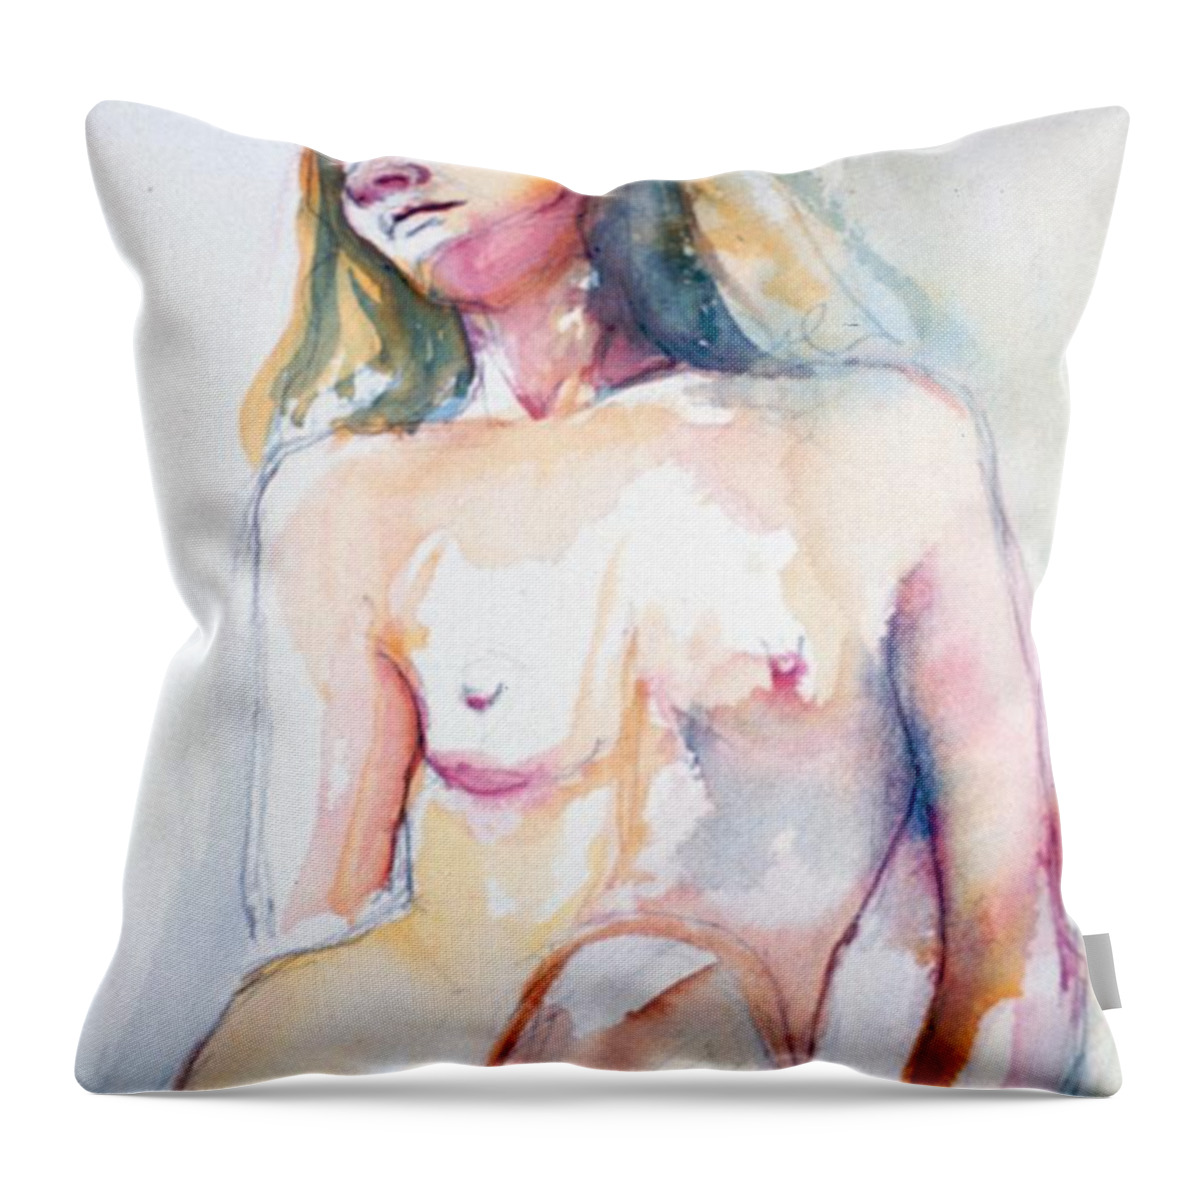 Full Body Throw Pillow featuring the painting Rita #7 by Barbara Pease